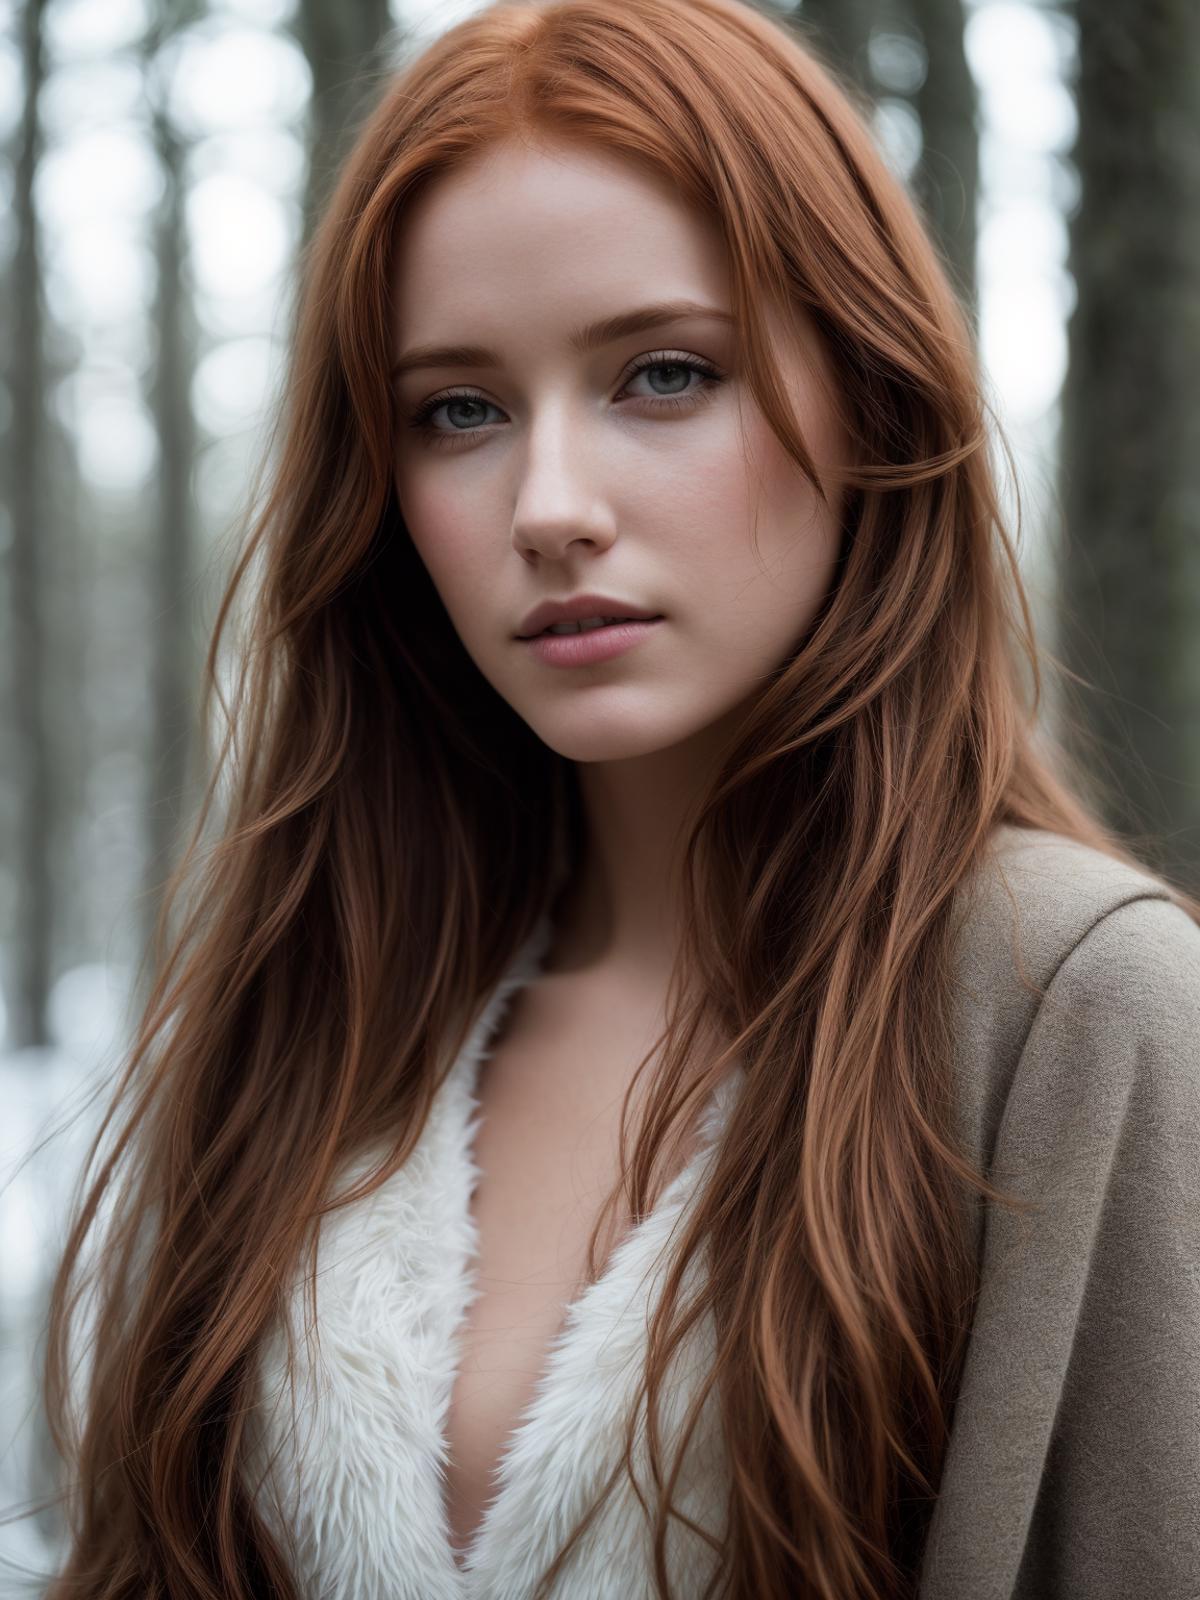 A young woman with long red hair and a fur coat on.